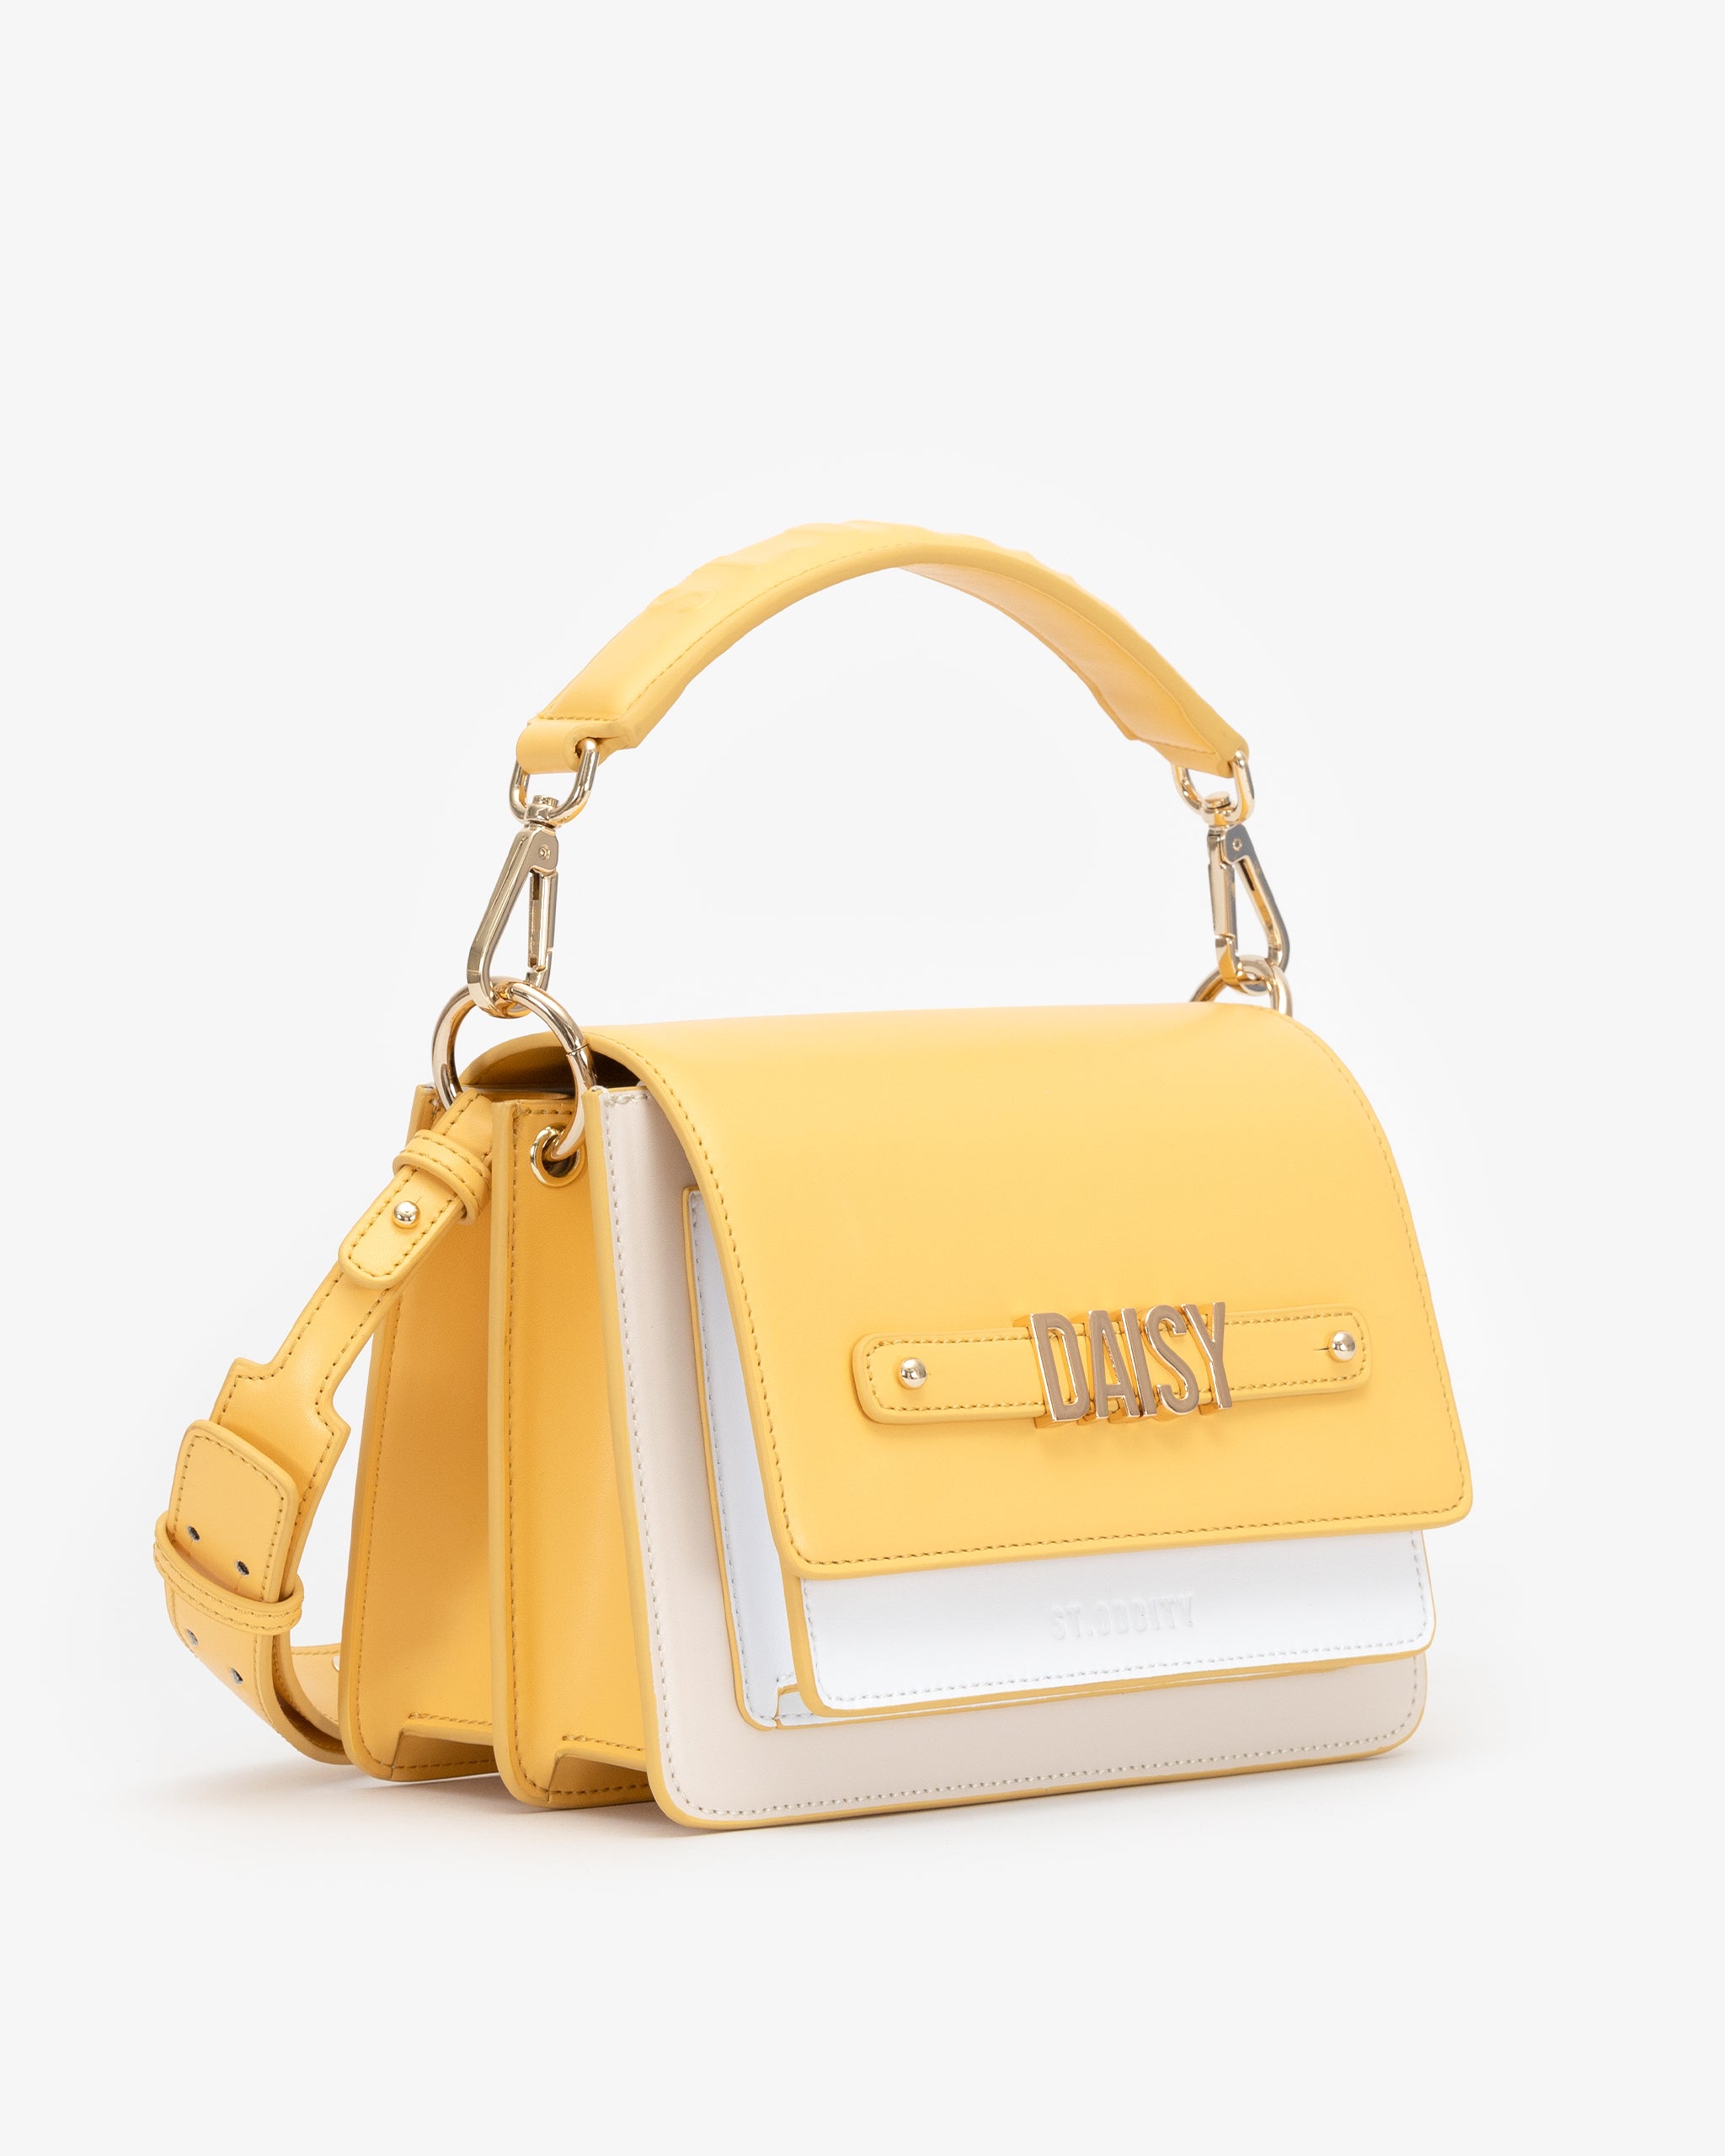 Shoulder Bag in Butter Multi with Personalised Hardware